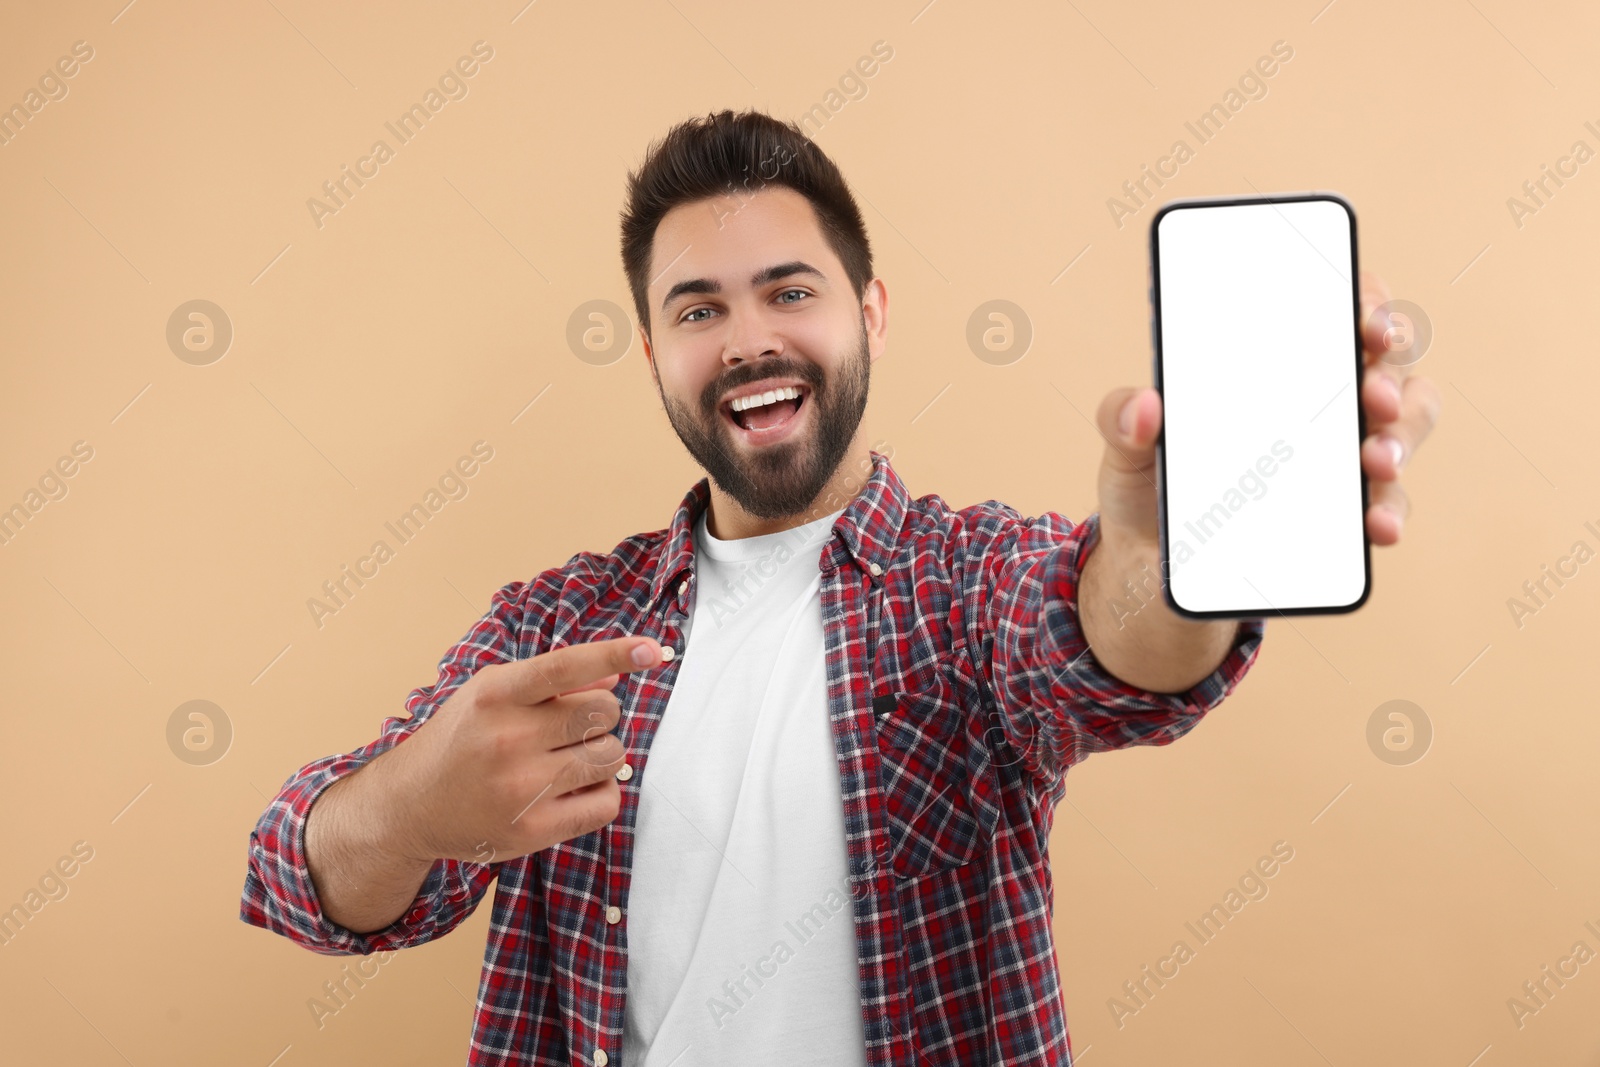 Photo of Young man showing smartphone in hand and pointing at it on beige background